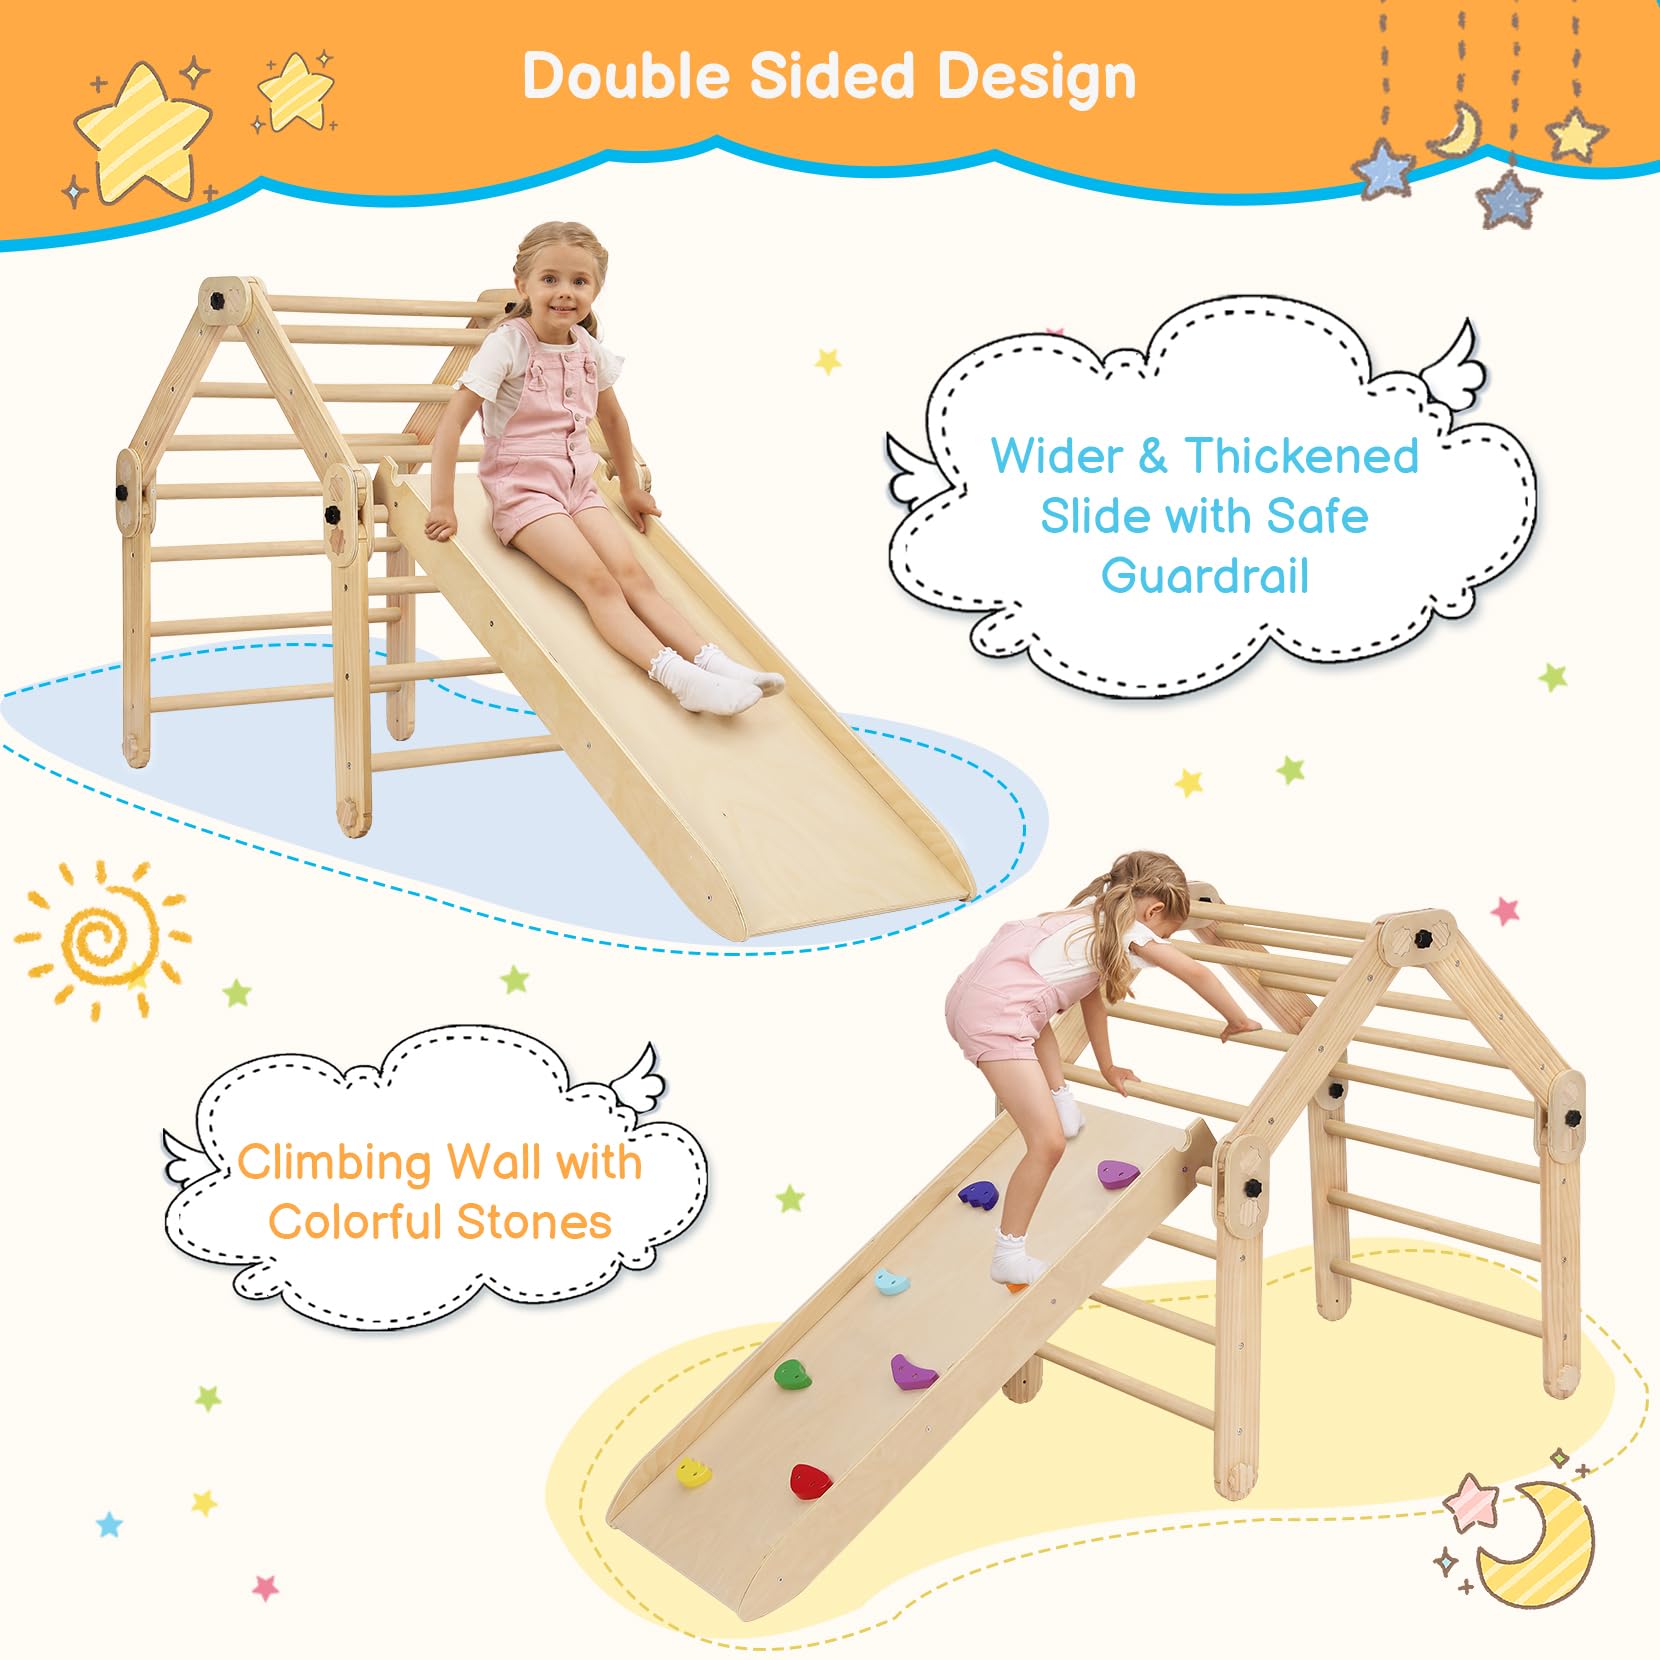 Dripex Pikler Triangle Climber Set, X-Large and Heavy-duty Climbing Frame with More Than 20 Playing Modes, Premium Early Learning Montessori Toy for 2-3 Children Play Together, Cycling Using for Years